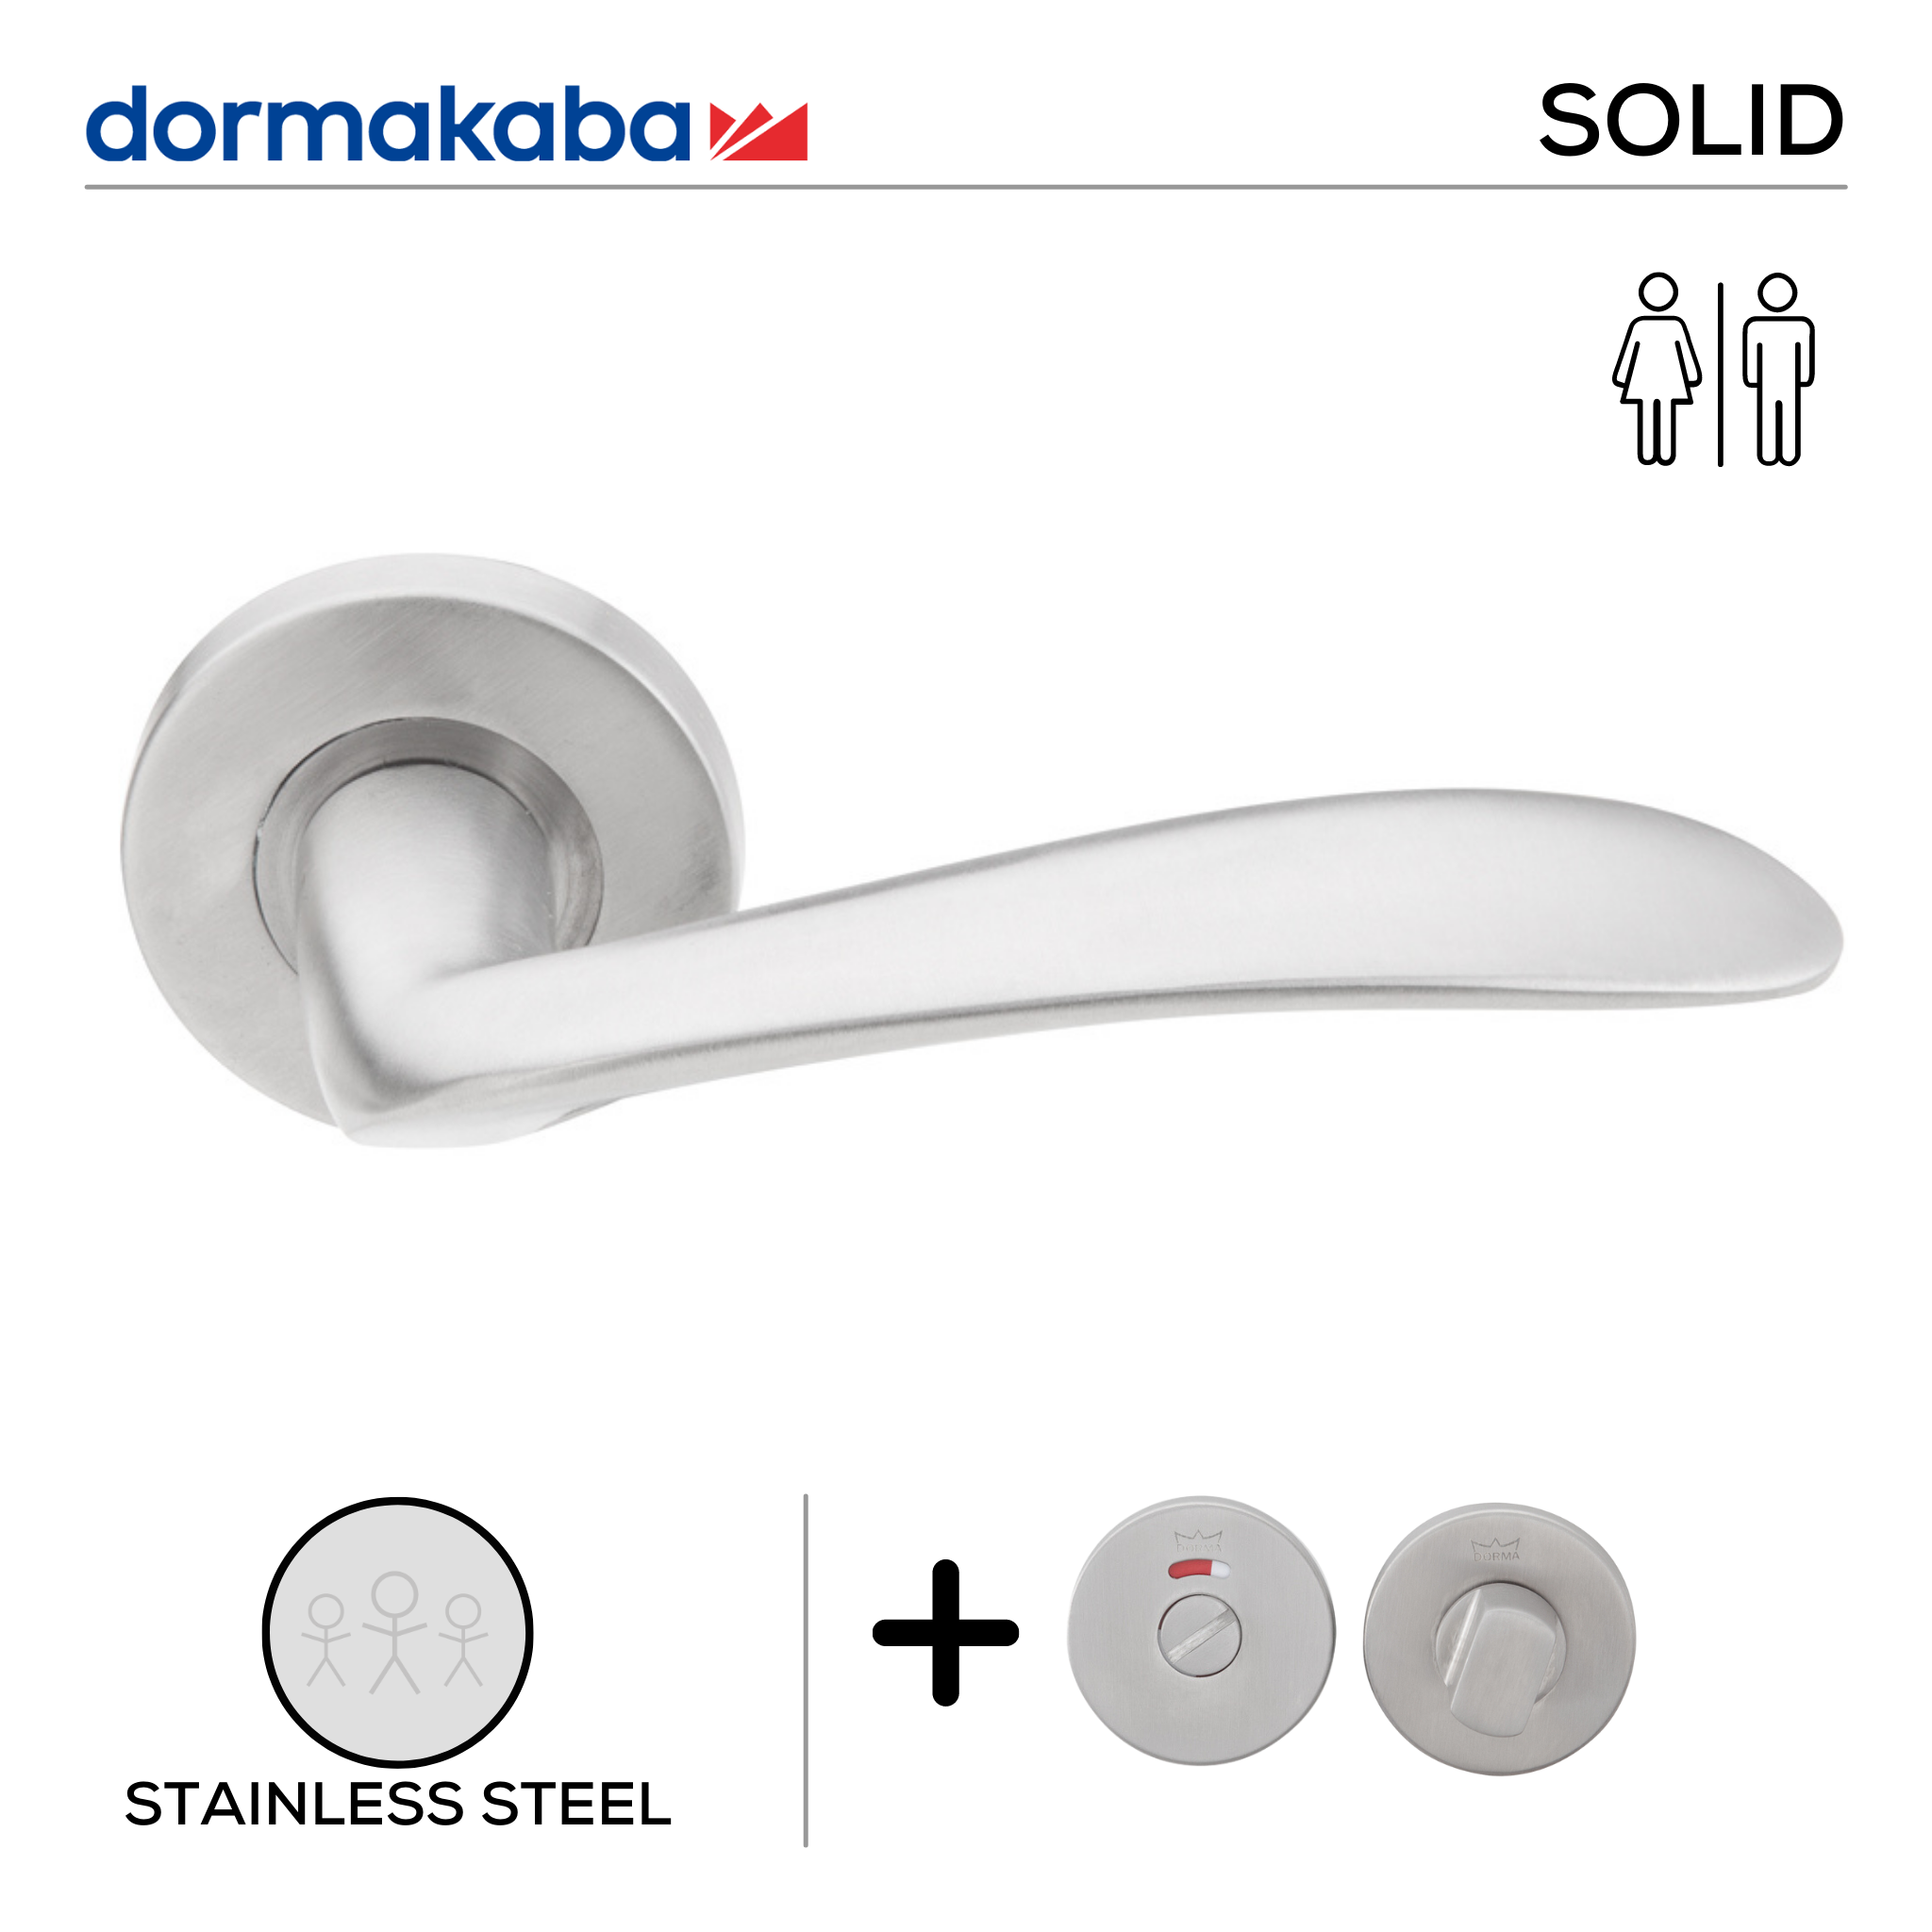 SH 810 Bathroom W/C, Lever Handles, Solid, On Round Rose, With Bathroom (WC) Indicator Set - DWC 005, 131mm (l), Stainless Steel, DORMAKABA